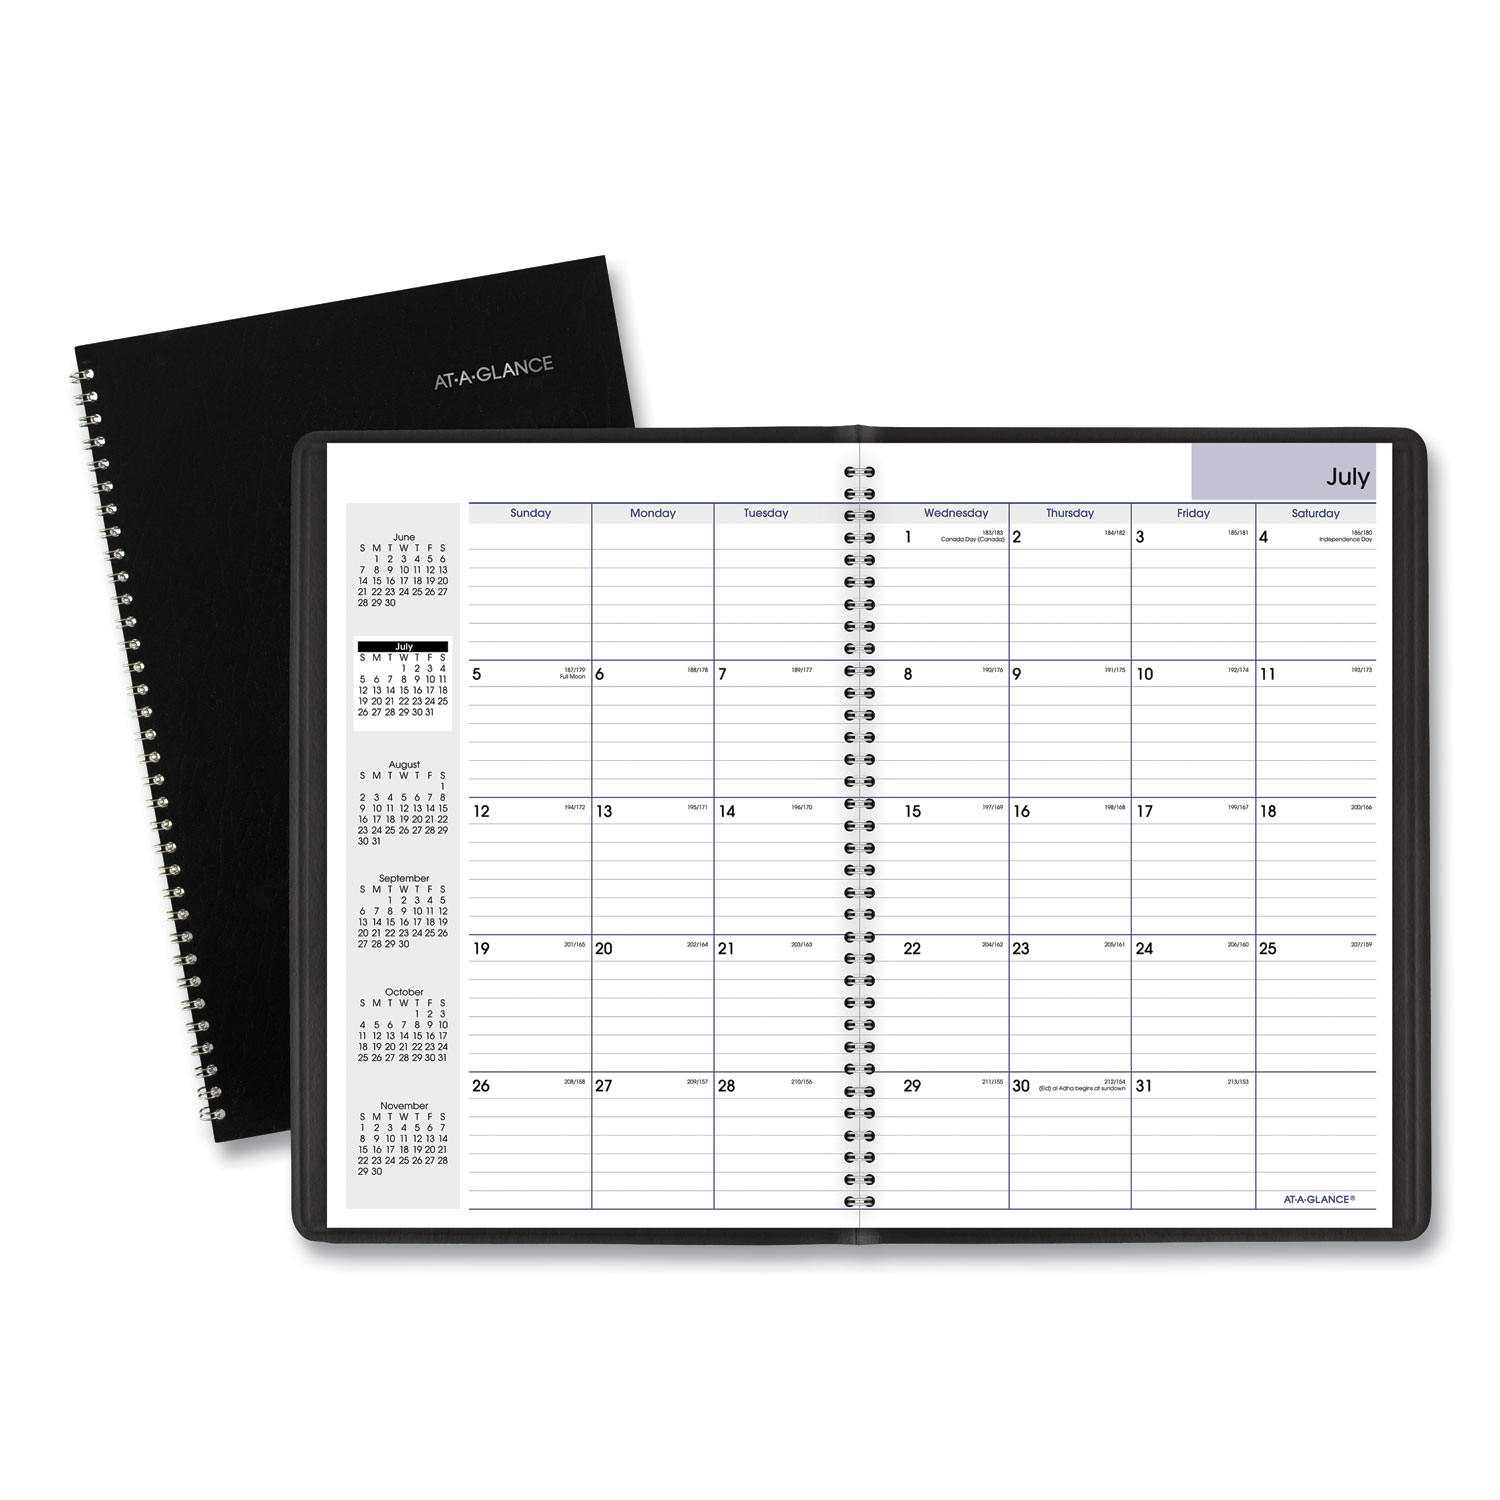  AT-A-GLANCE AY200 Academic Monthly Planner, 12 x 8, Black, 2020-2021 (AAGAY200) 